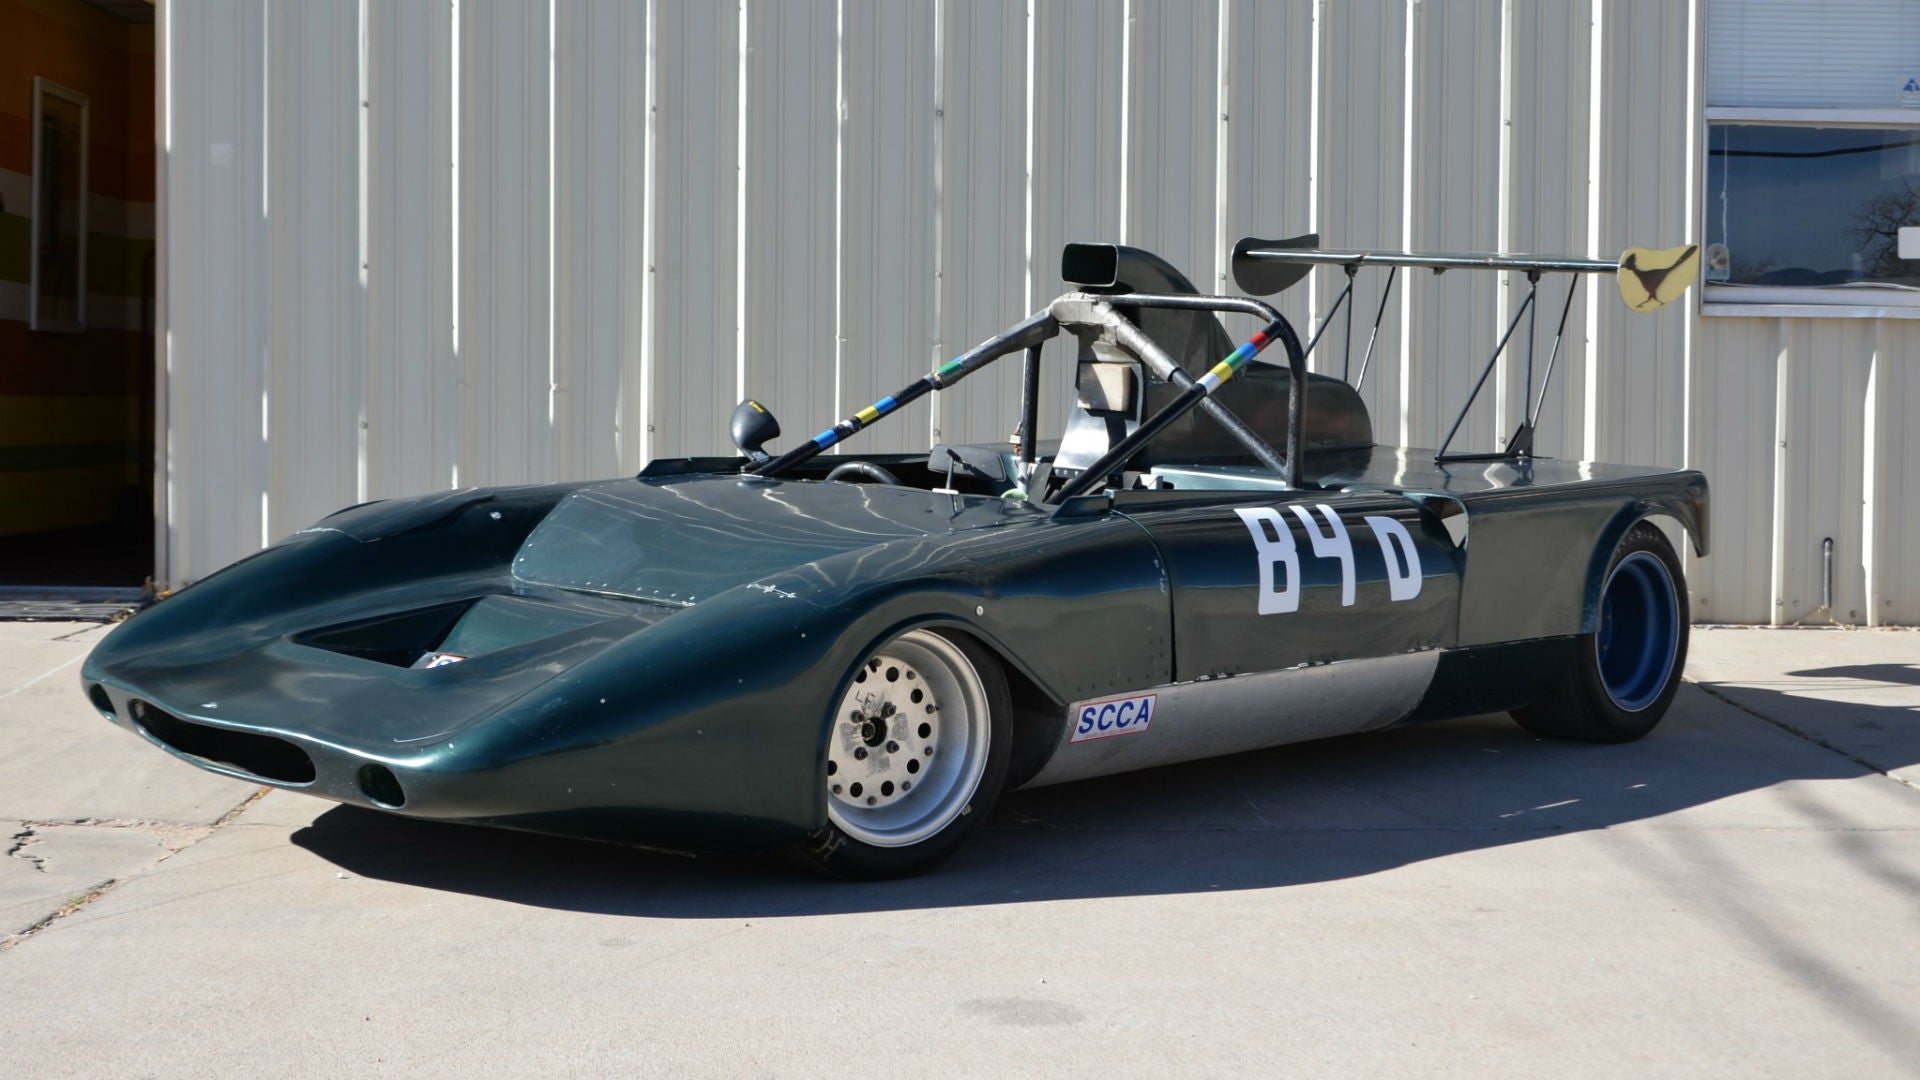 This Non-Running Quasar Race Car Project Puts Function Over Form